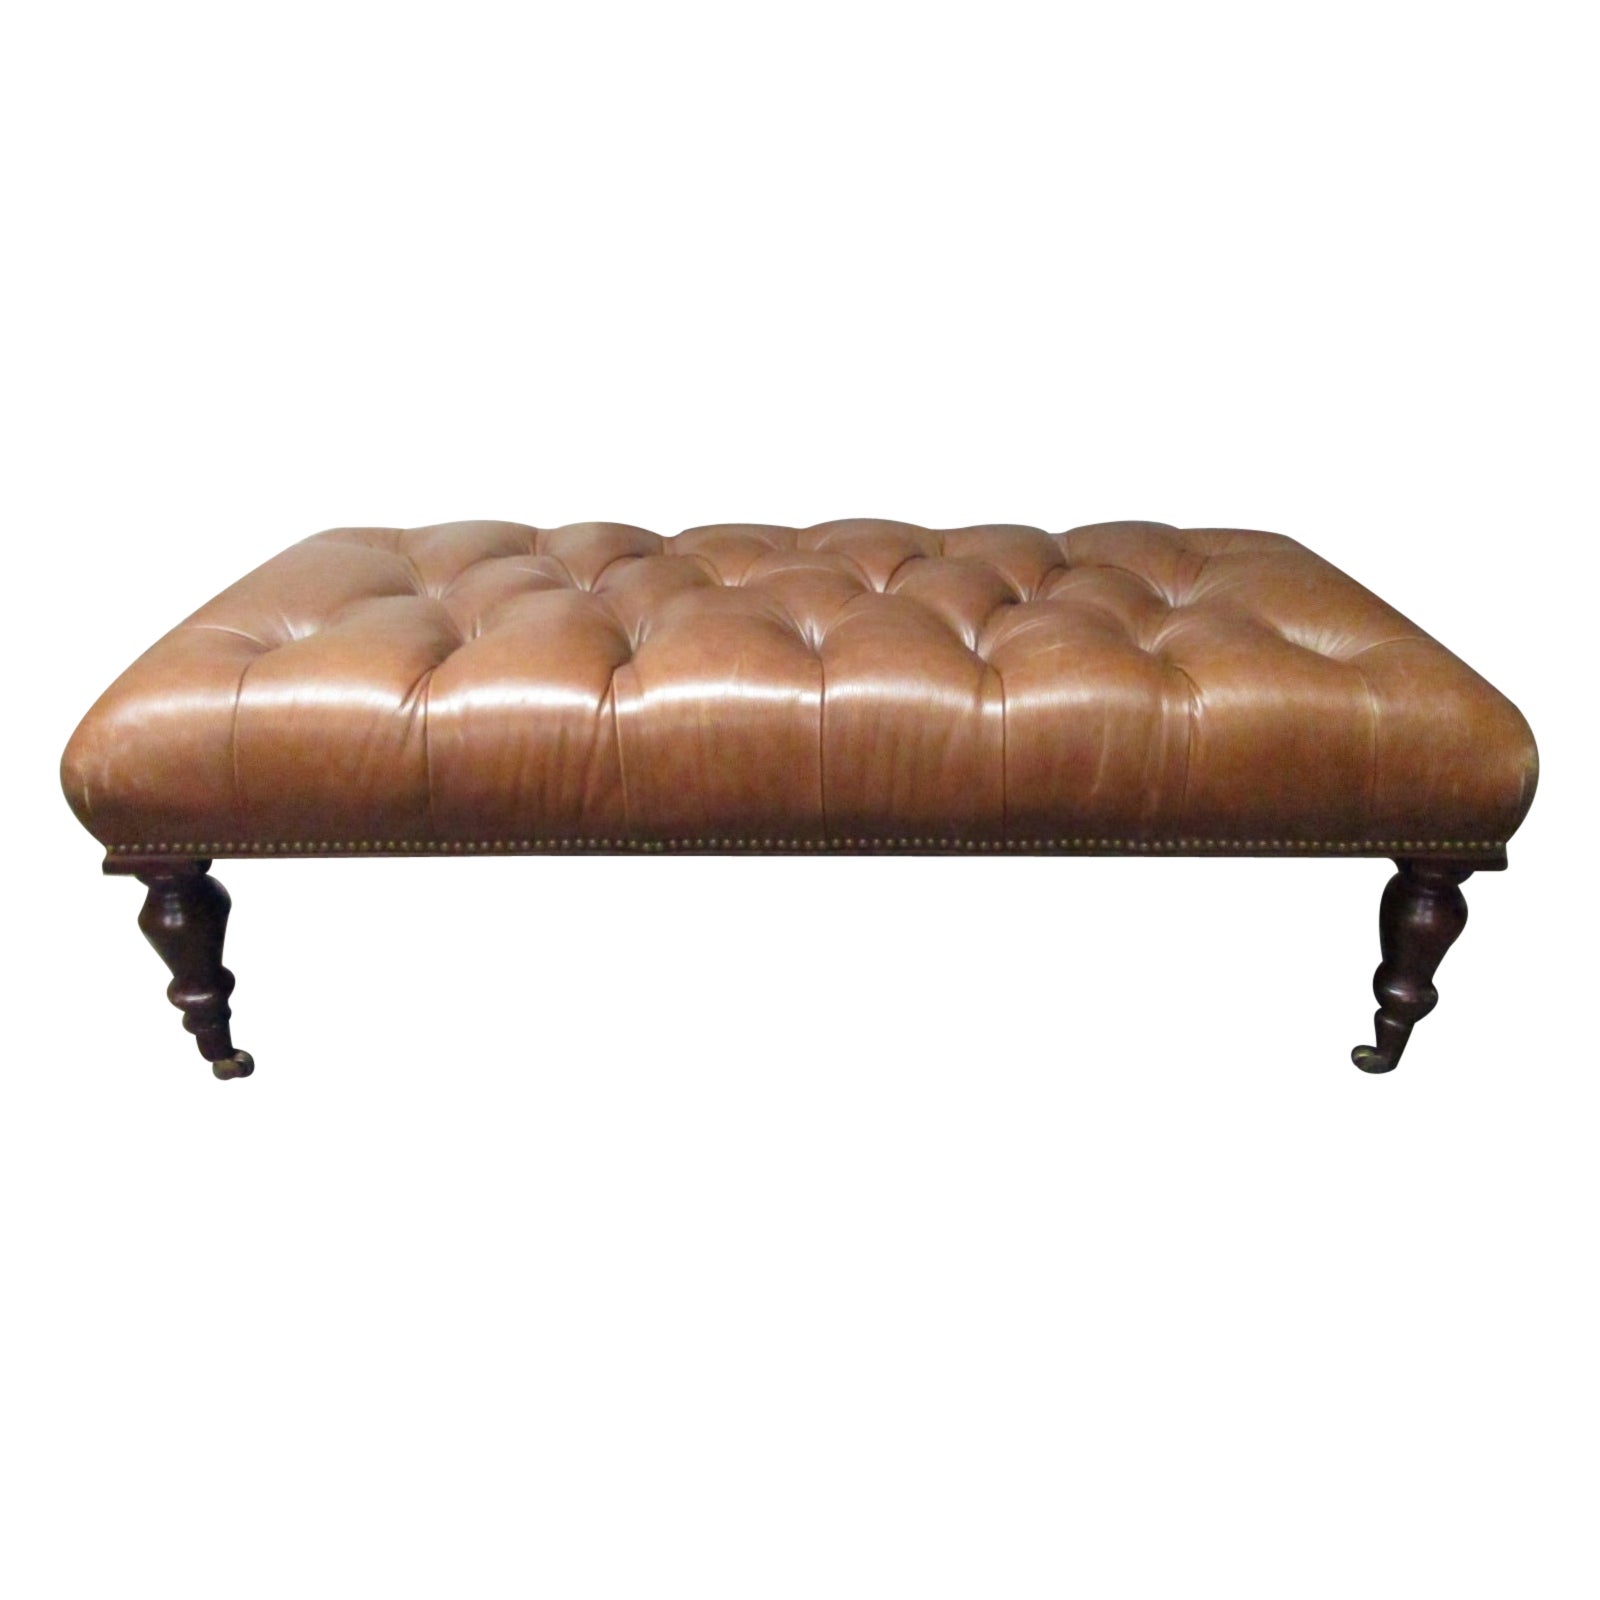 George Smith English Tufted Leather Bench